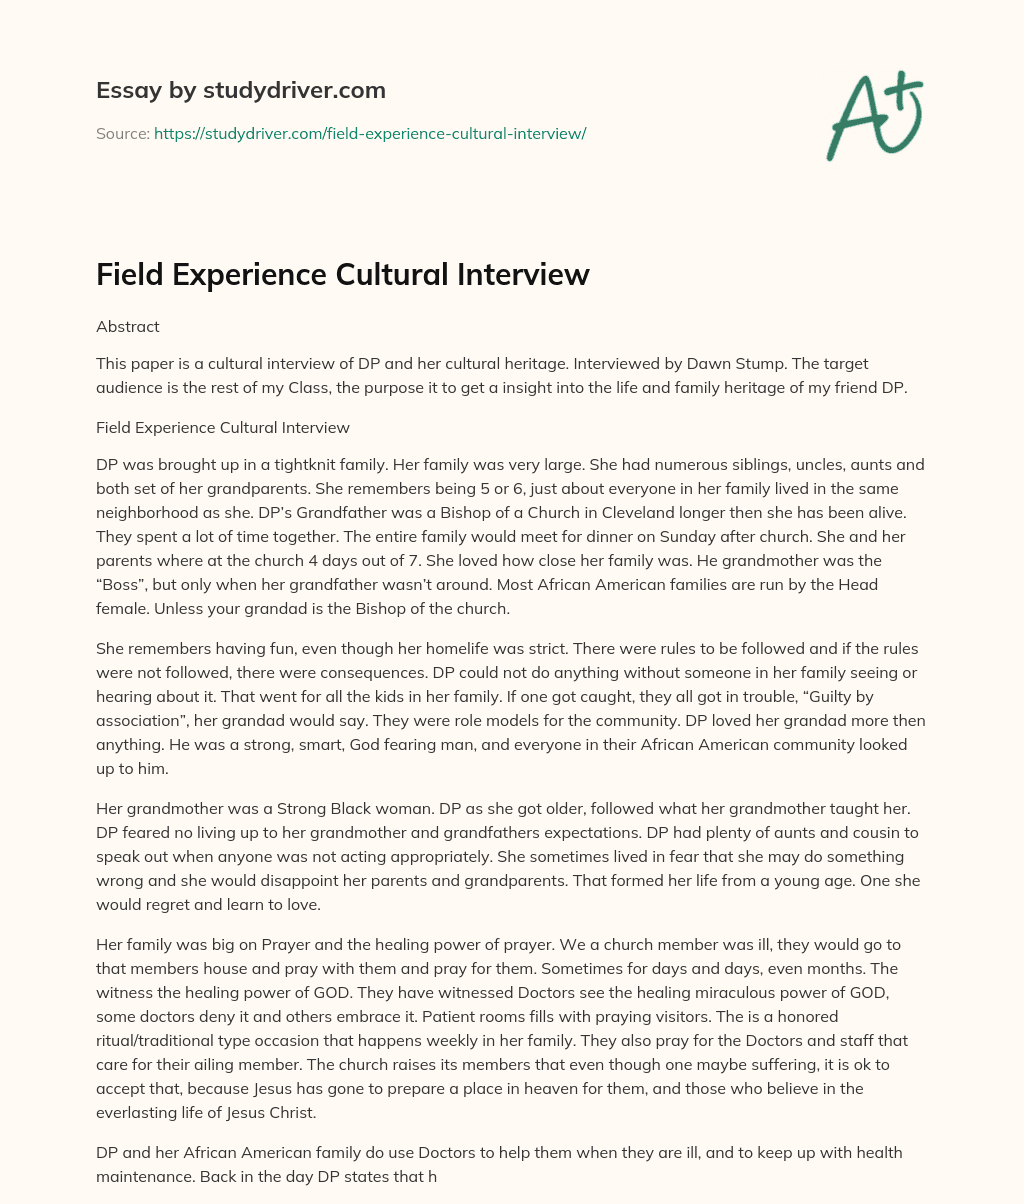 Field Experience Cultural Interview essay